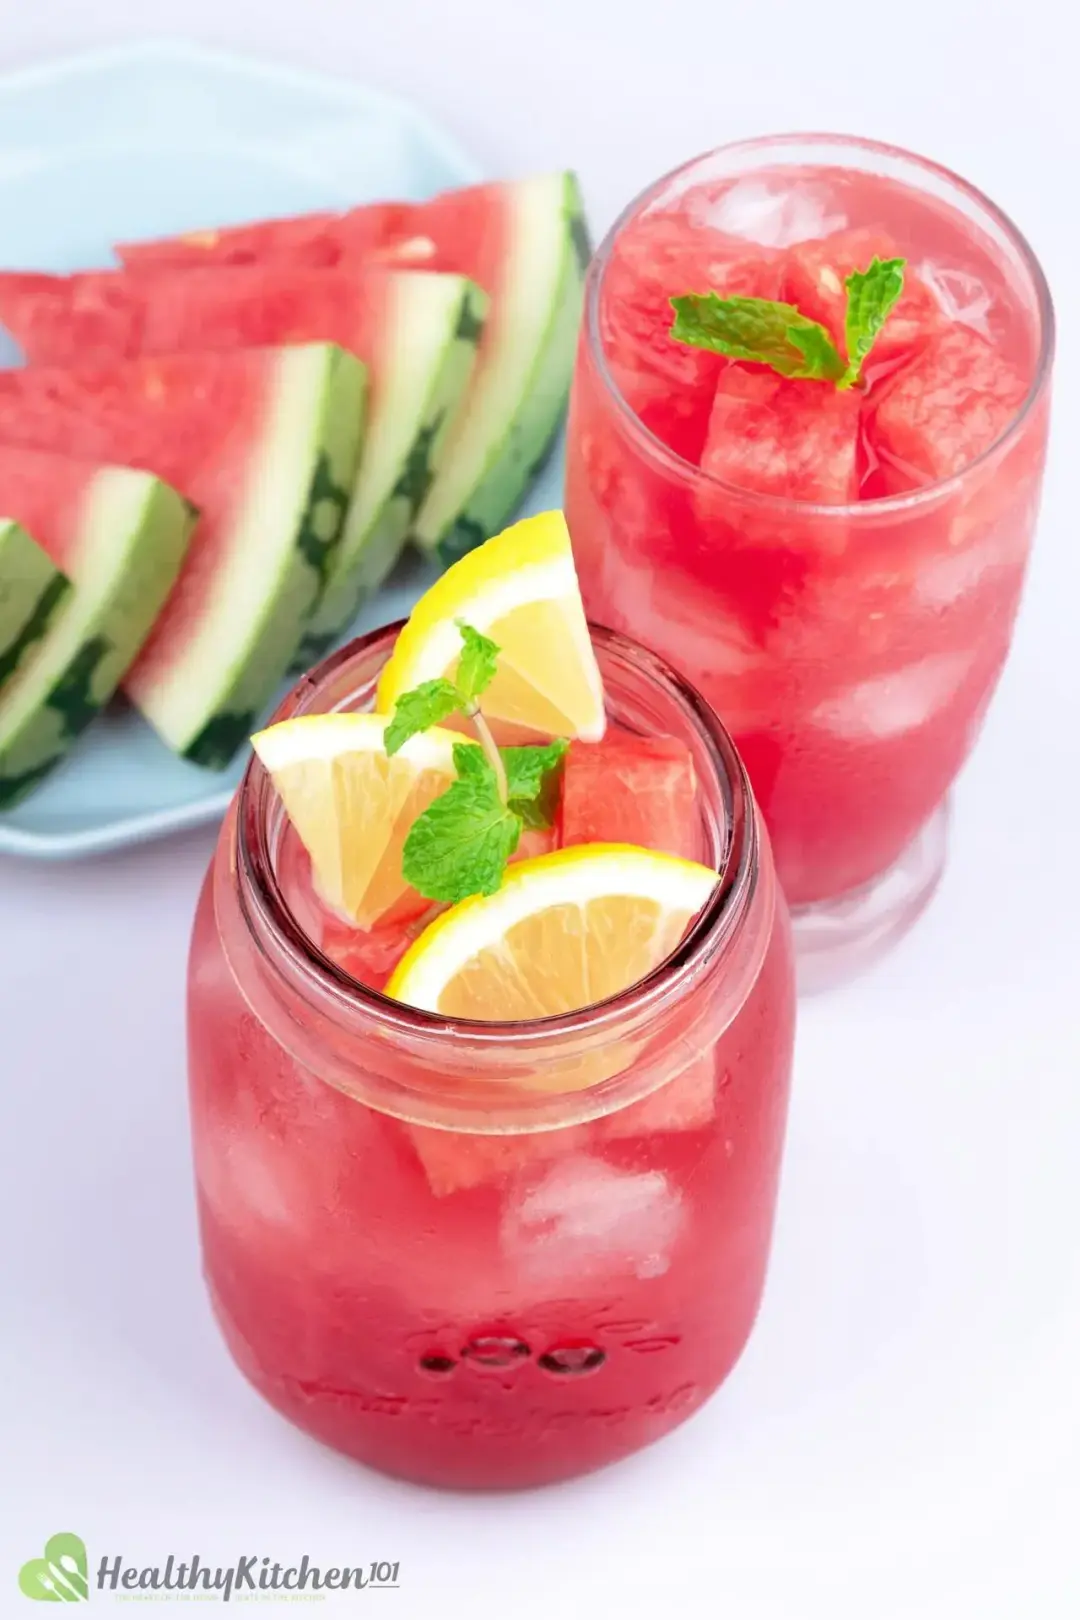 Two glasses of watermelon juice and lemon decorated with lemon slices and mint leaves with a plate of watermelon slices on the background